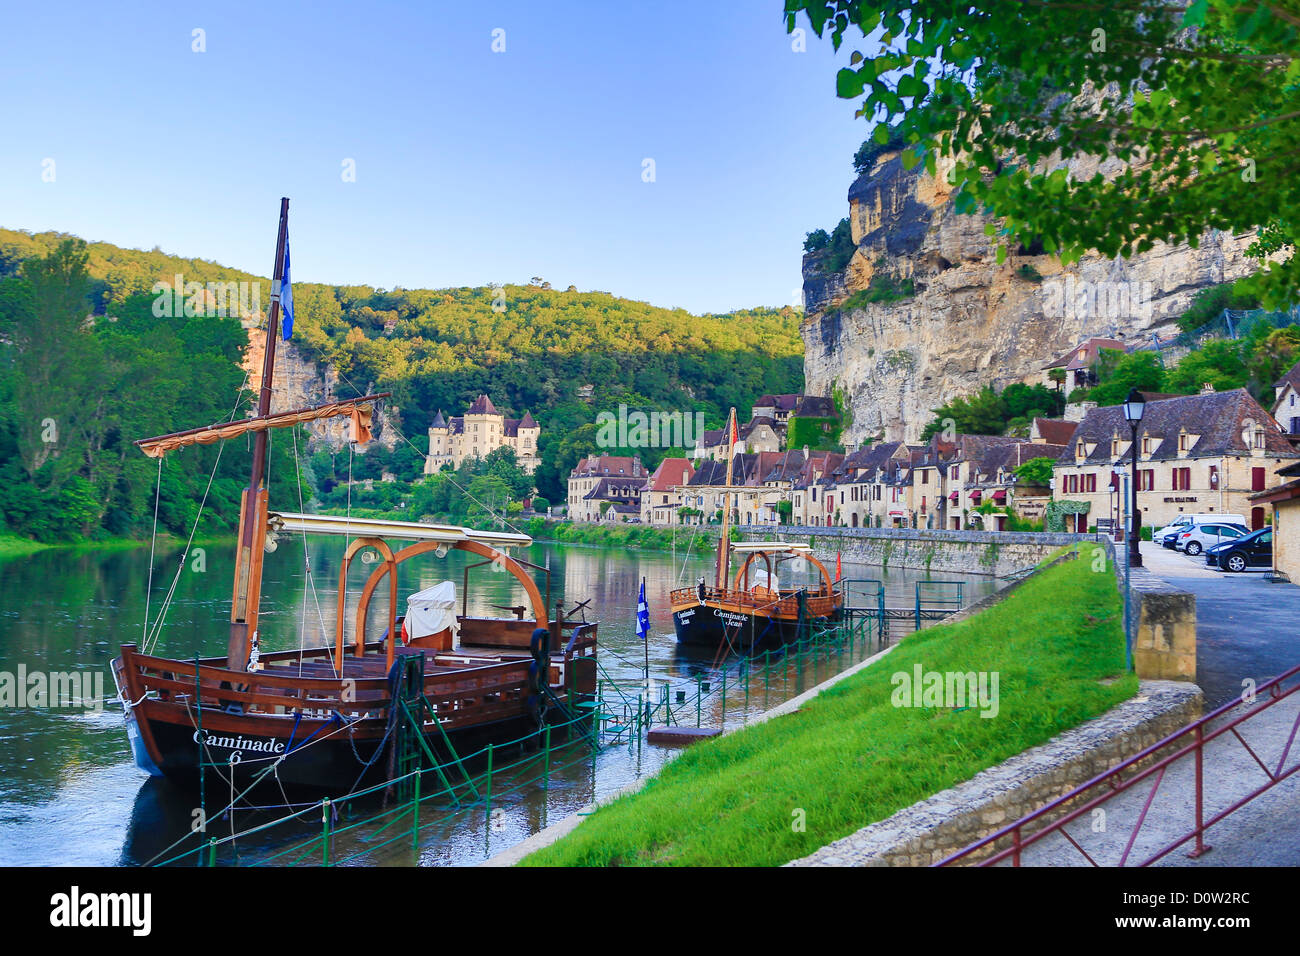 France, Europe, travel, Dordogne, La Roque Gageac, River, architecture, medieval, reflection, traditional, valley, village, boat Stock Photo